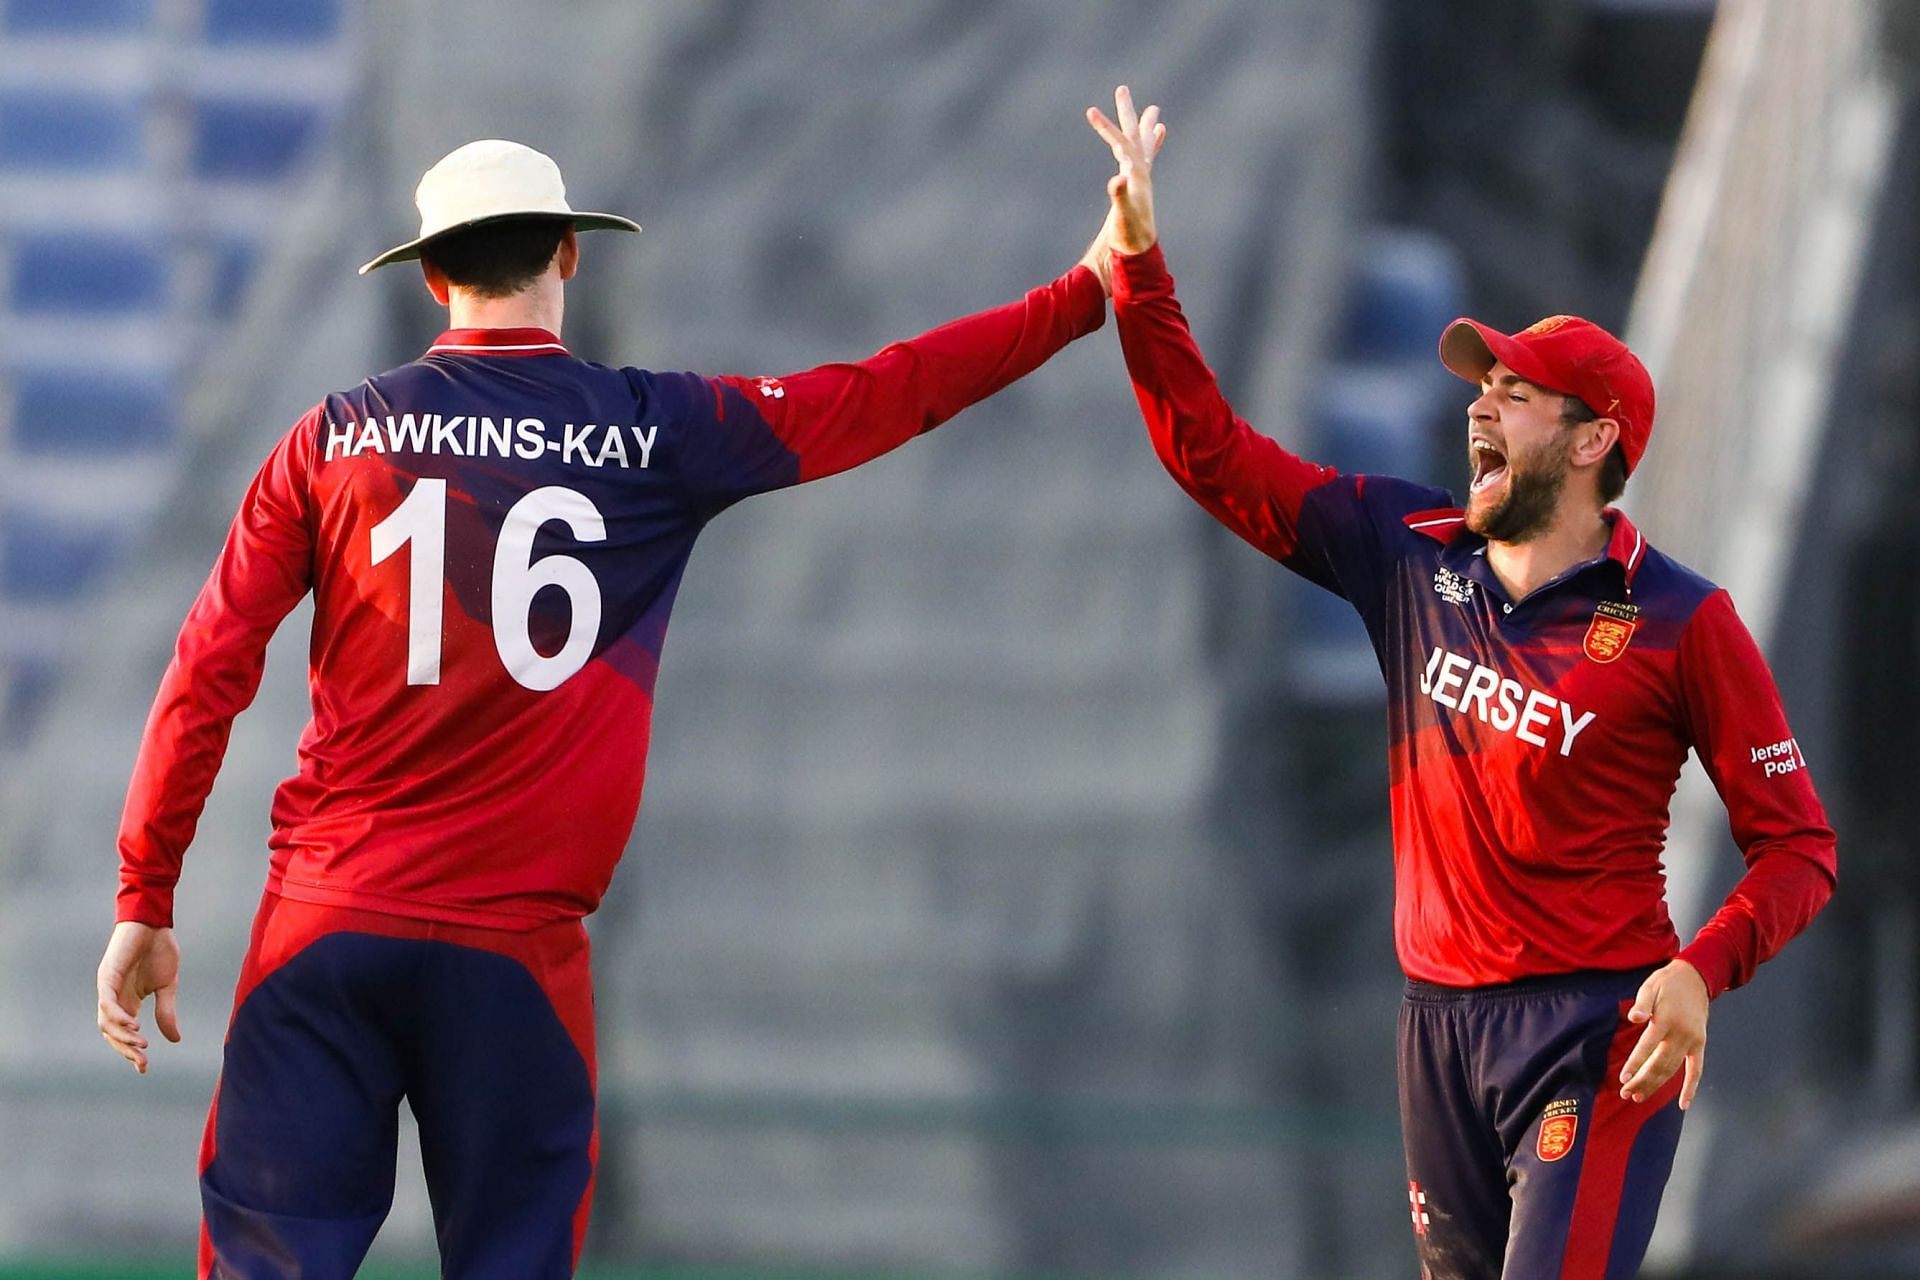 Players of the Jersey cricket team celebrate the fall of a wicket. (Image Courtesy: ICC Cricket)